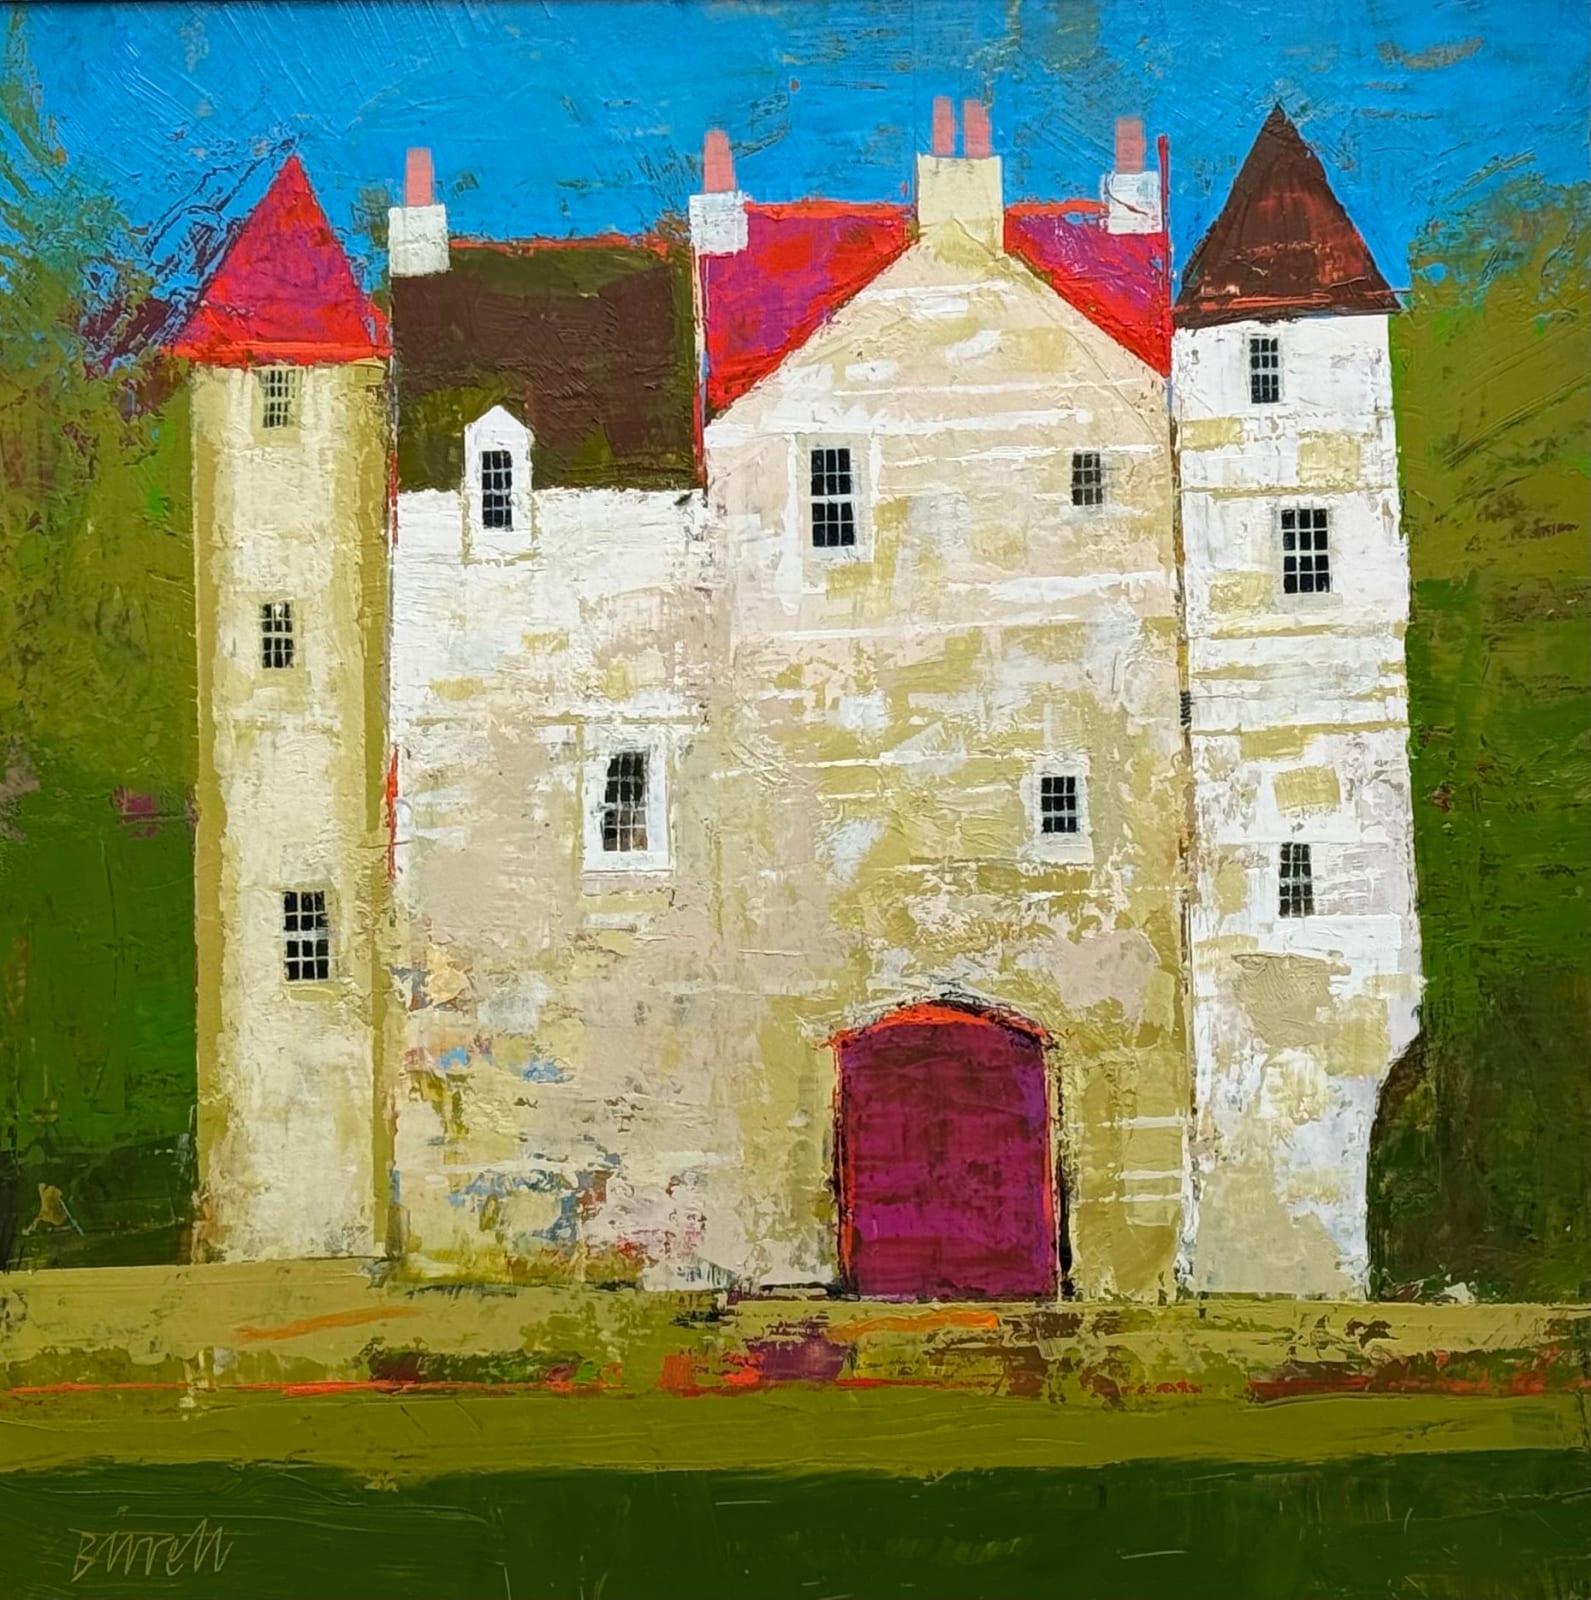 George Birrell, Gable and Turrets